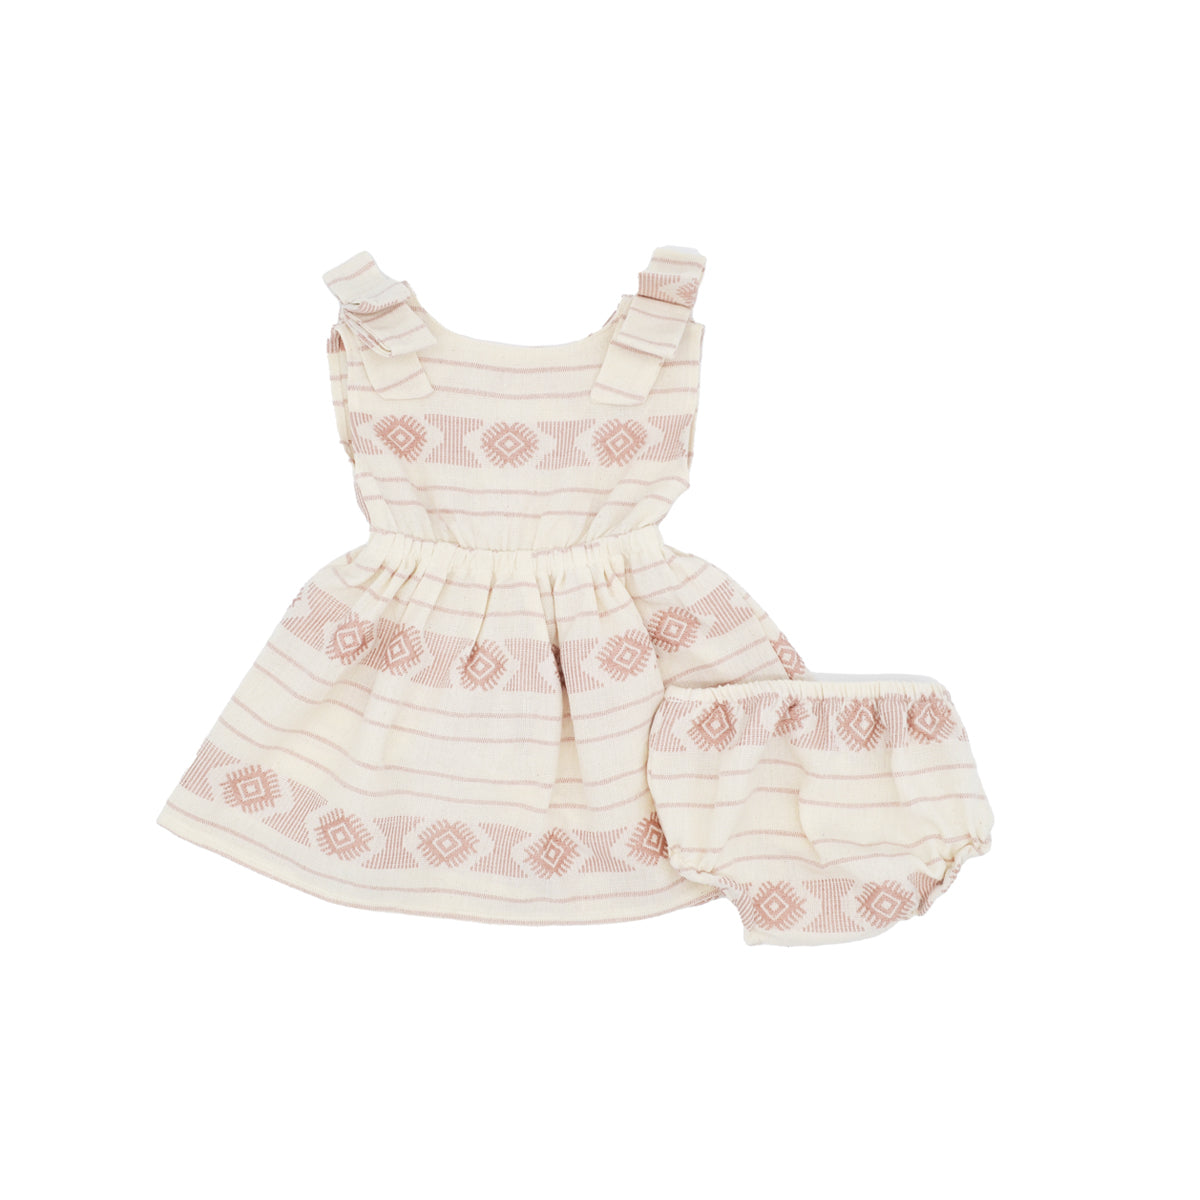 Mini Agnes Pinafore Set in Dust Pink Embroidery by Folklore Las Ninas